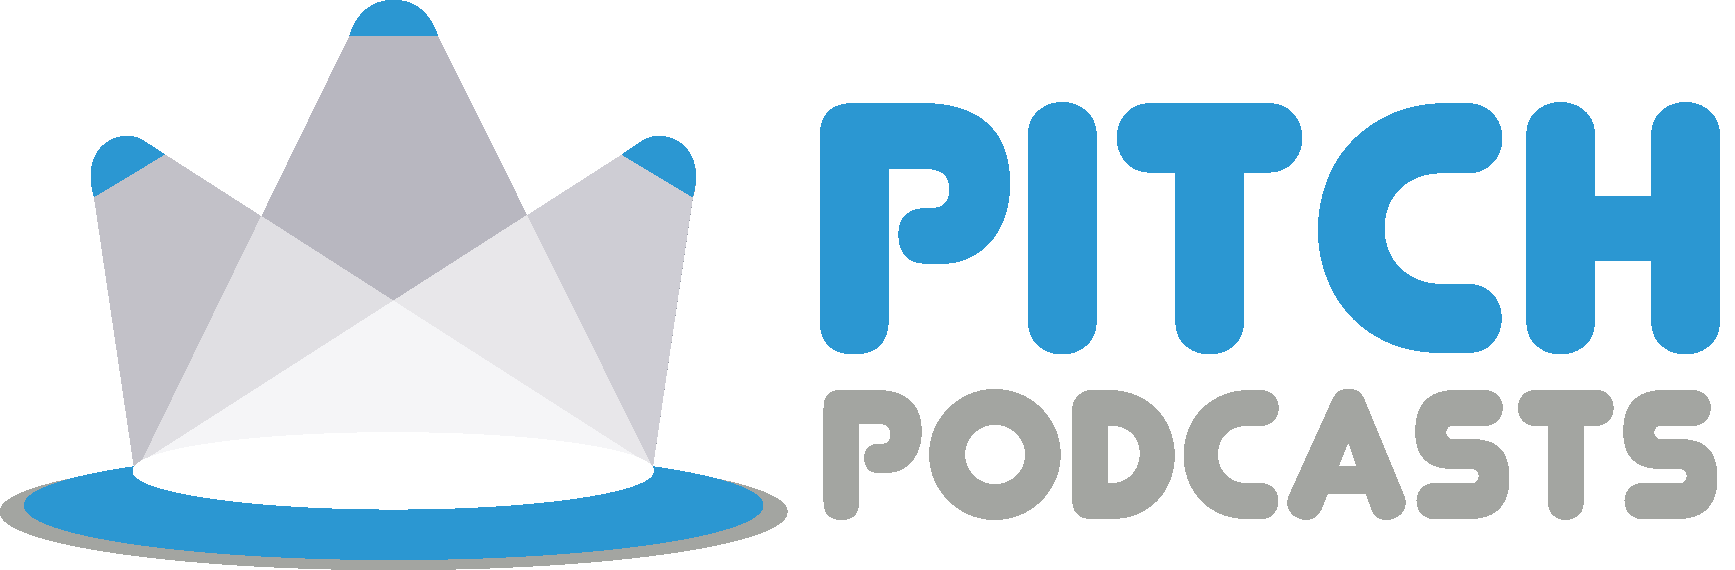 Pitchpodcasts Logo